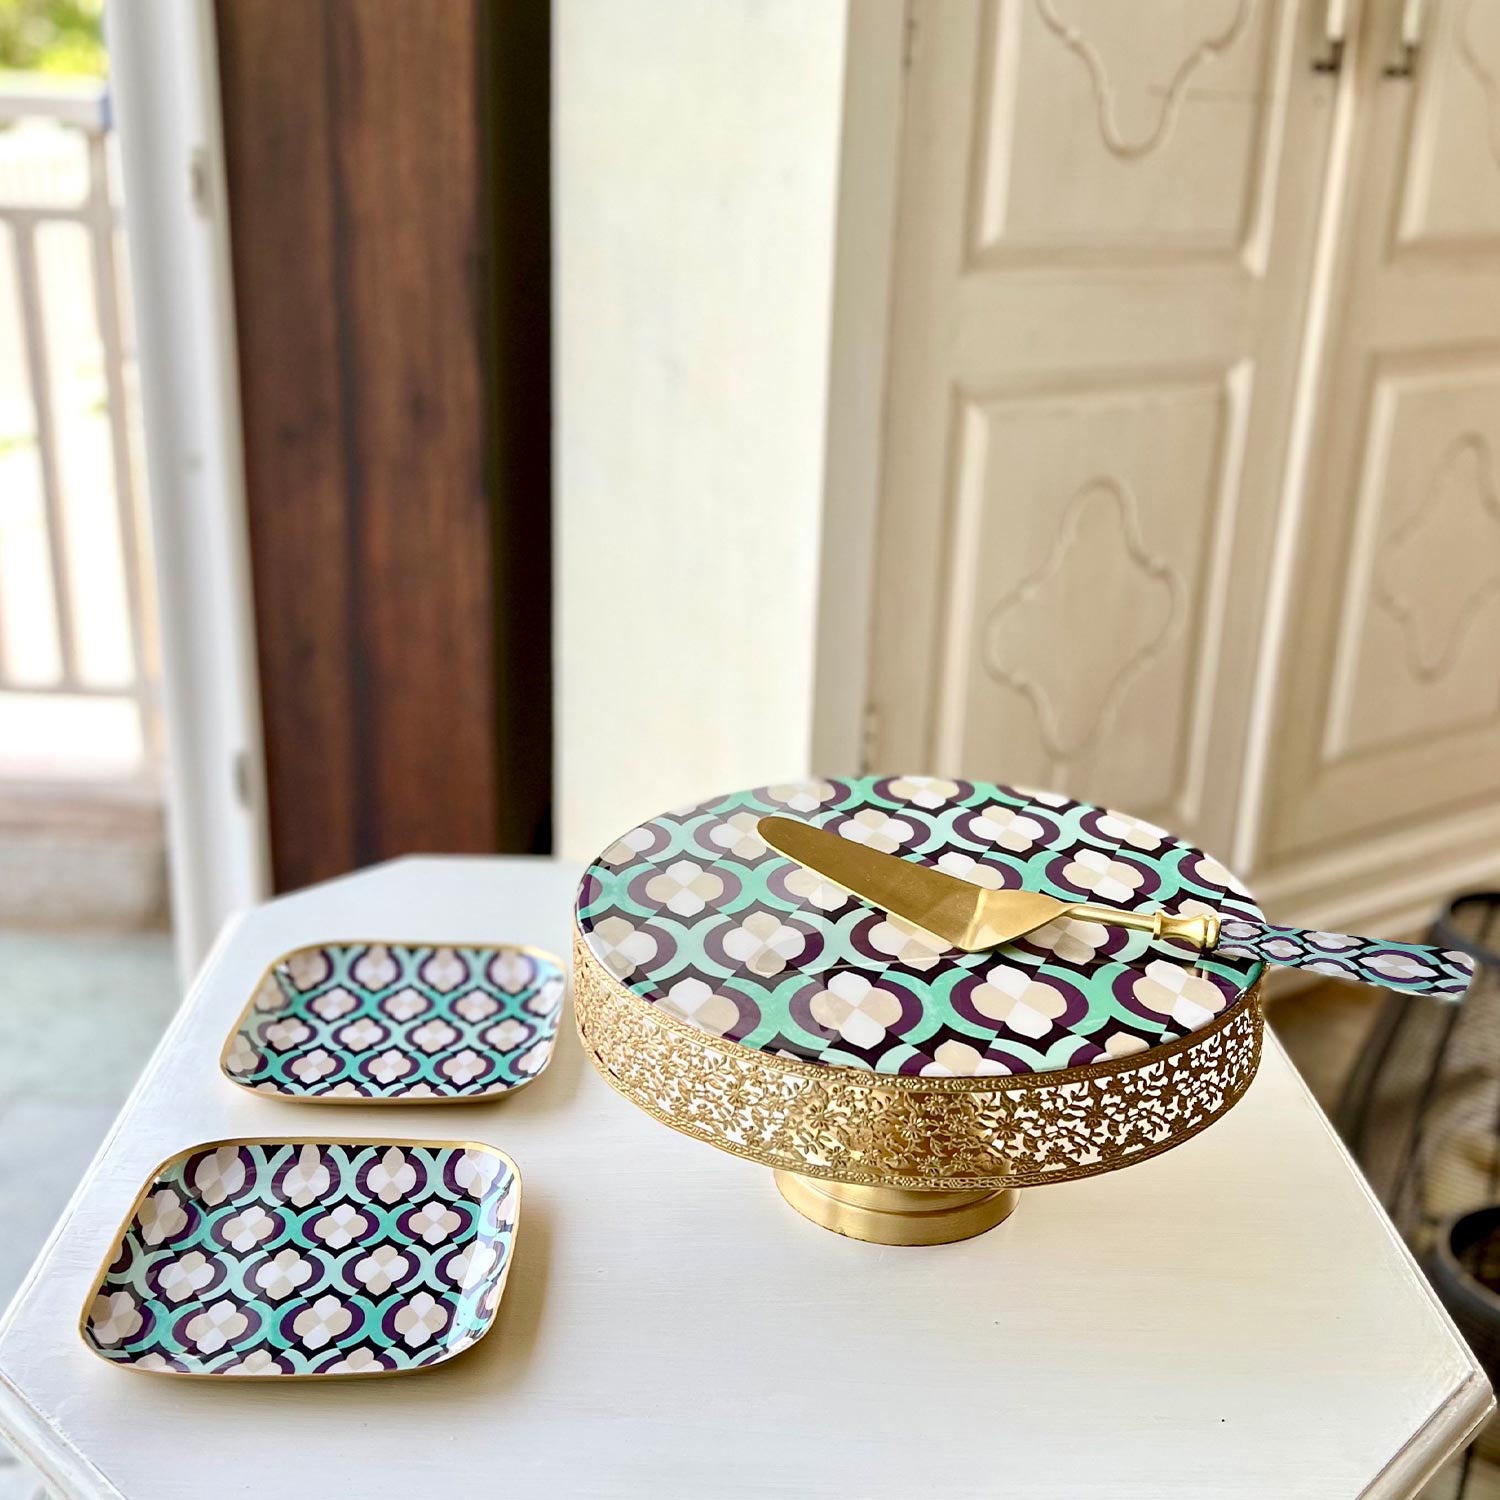 Cake Stand - Moroccan Mint